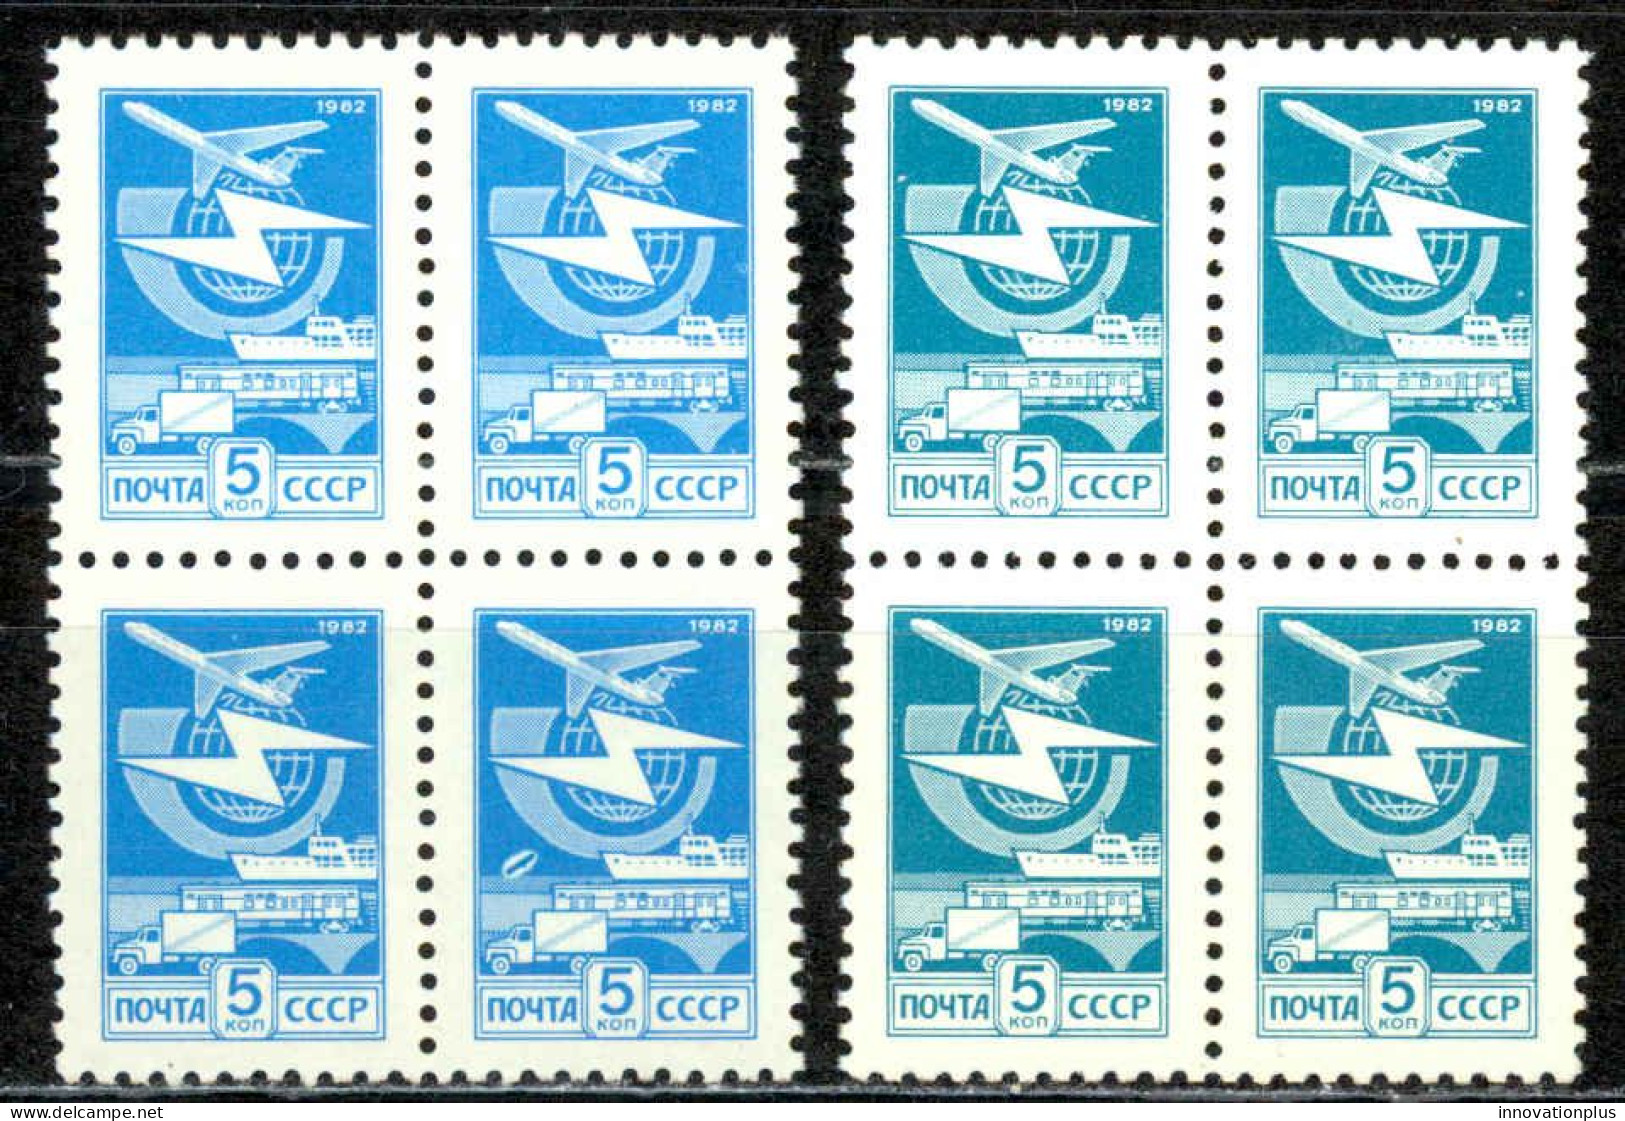 Russia Sc# 5112-5113 MNH Block/4 1982 Mail Transport - Unused Stamps